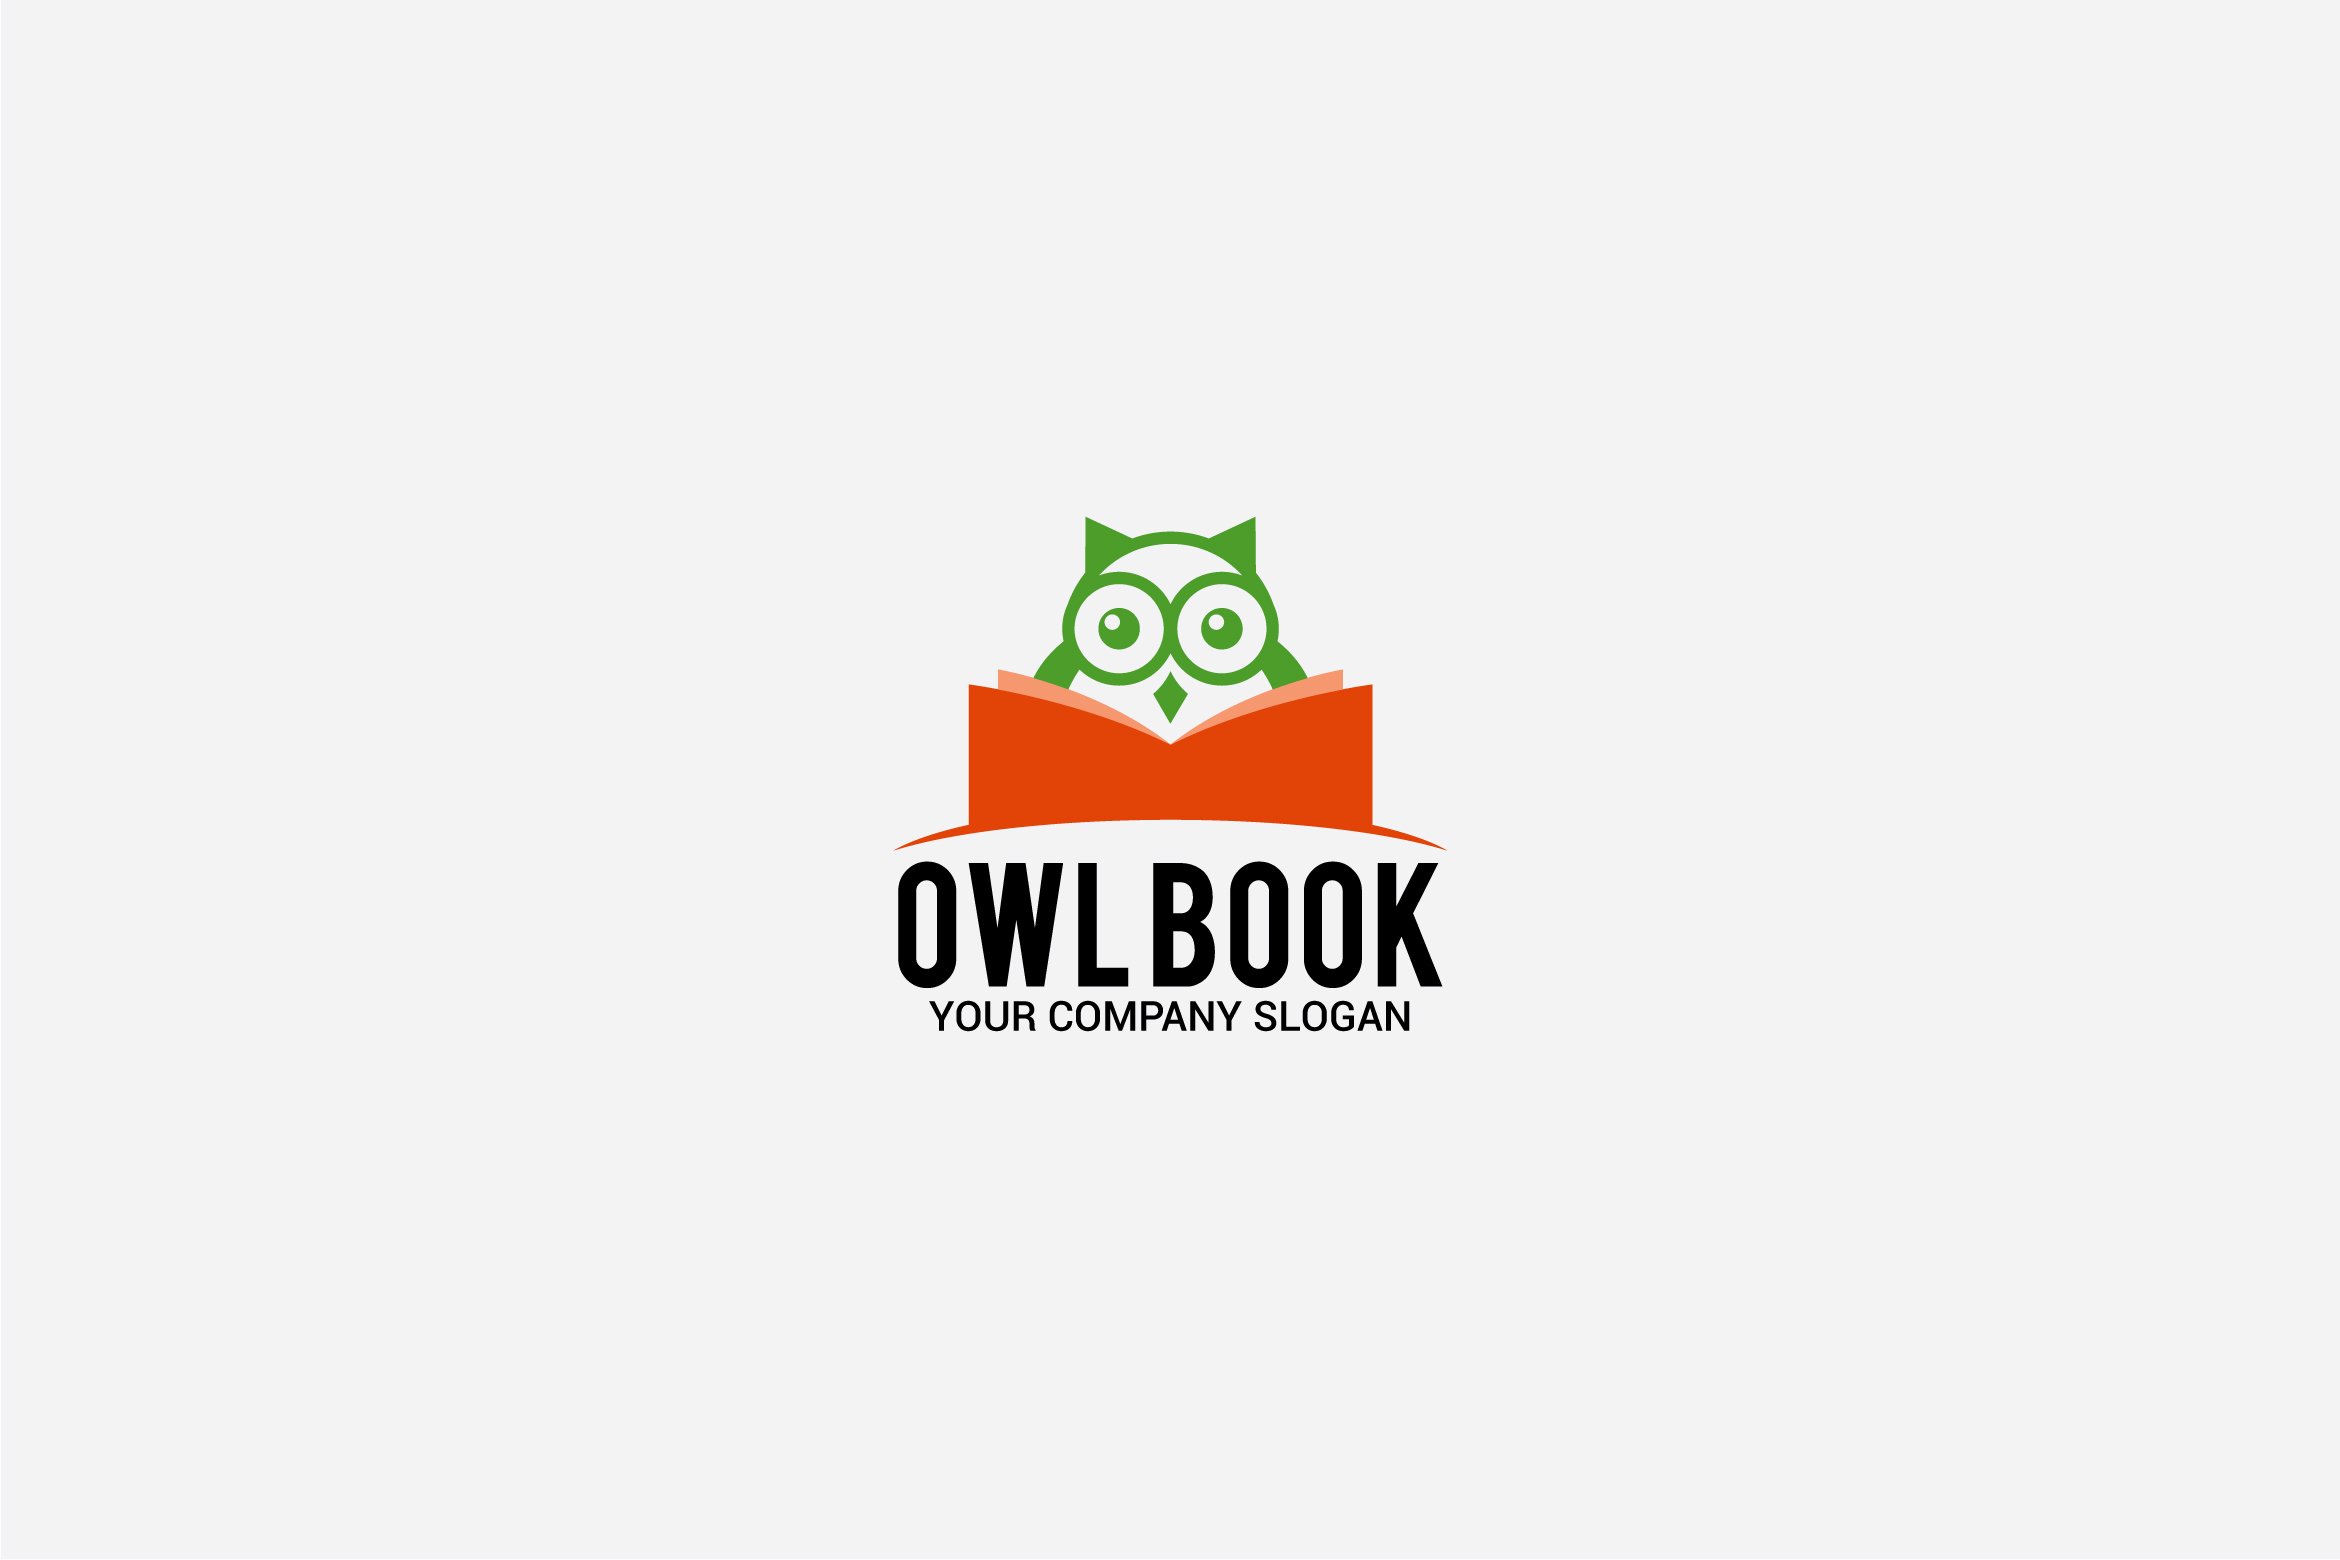 The owl is green by the book.